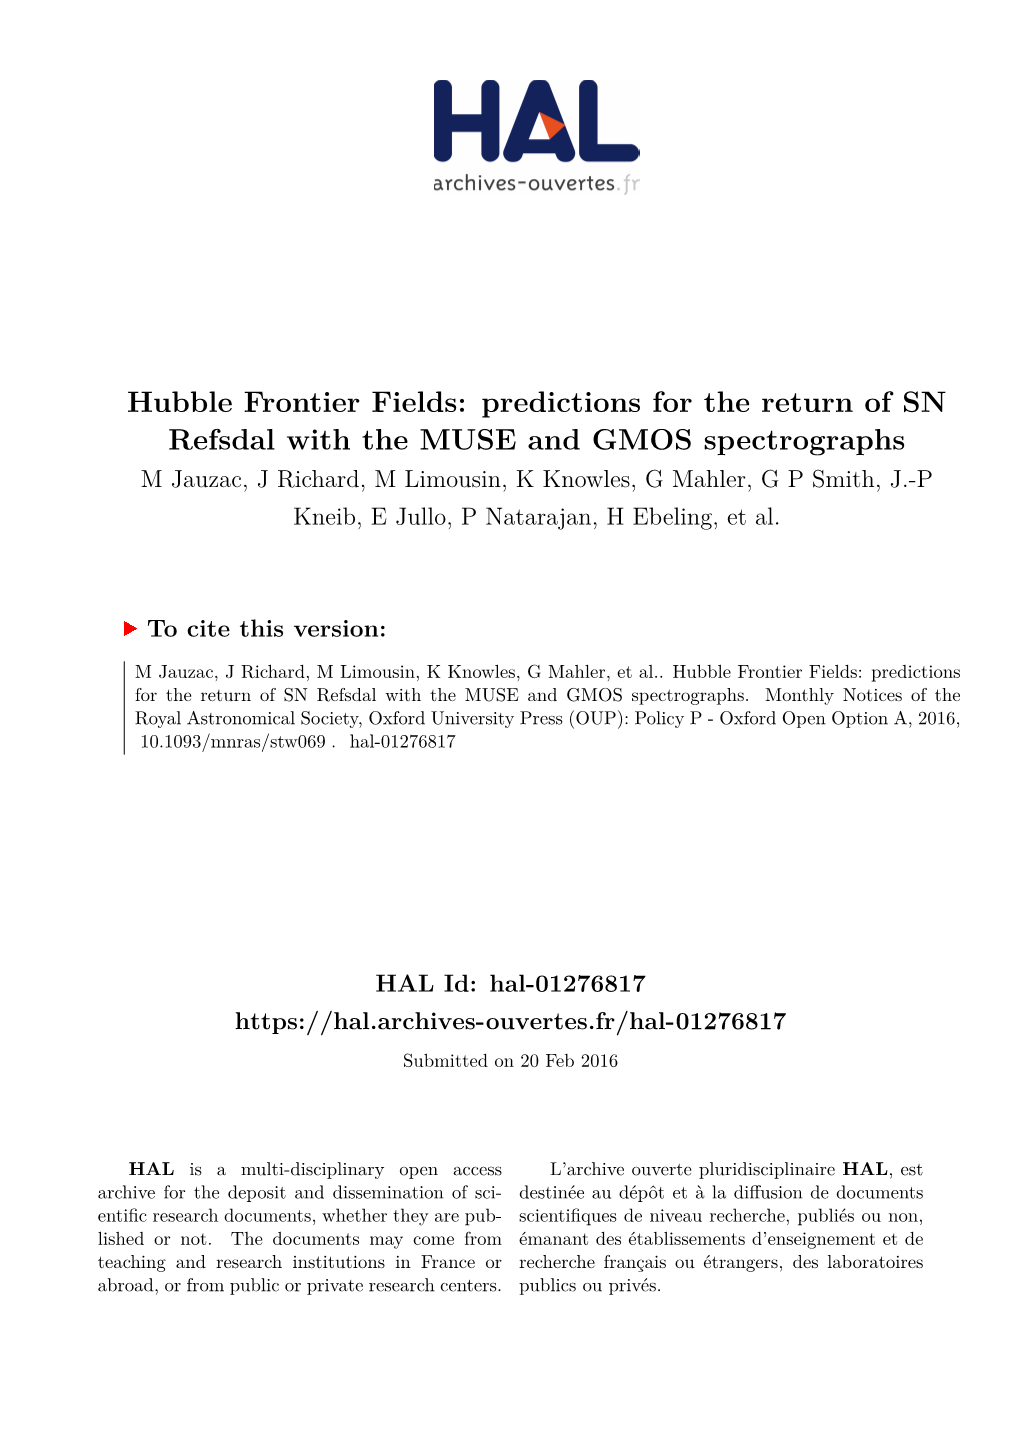 Hubble Frontier Fields: Predictions for the Return Of